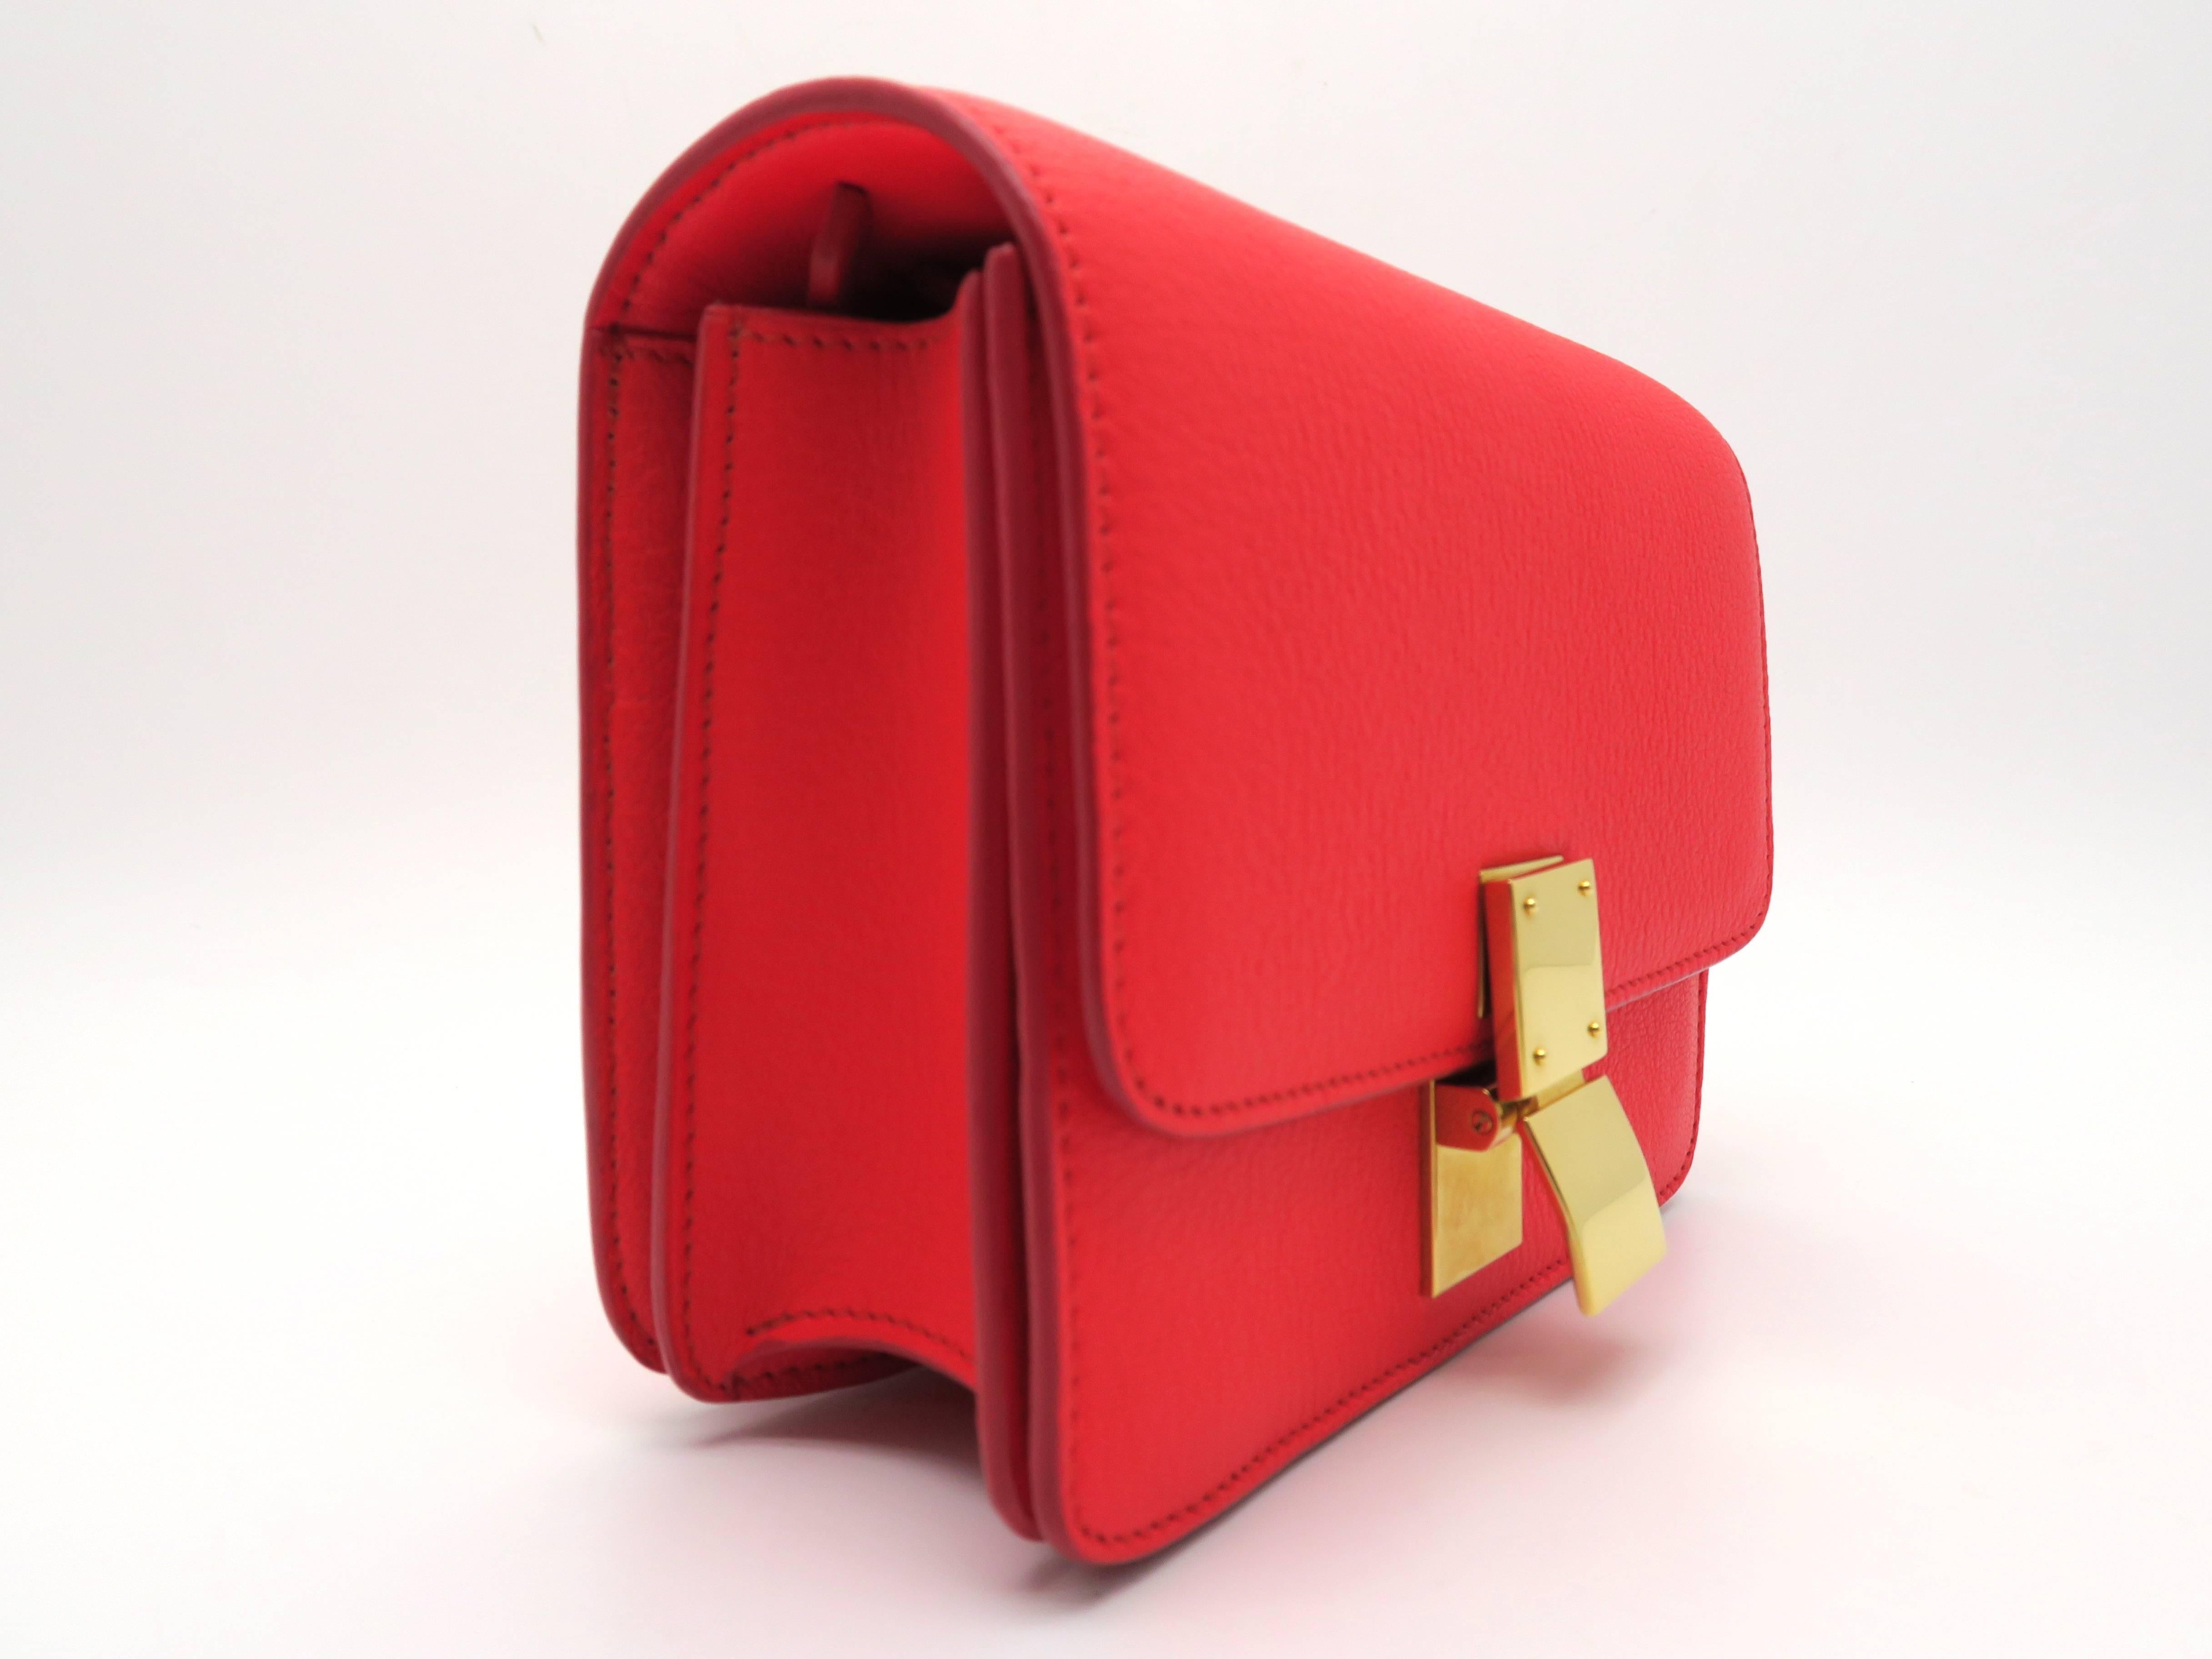 Color: Red

Material: Calfskin Leather

Condition: Rank A
Overall: Good, few minor defects
Surface: Minor Stains
Corners : Good
Edges: Good 
Handles/Straps: Good 
Hardware: Minor Scratches

Dimension: W16.5 × H13.5 × D6cm（W6.4" × H5.3" ×